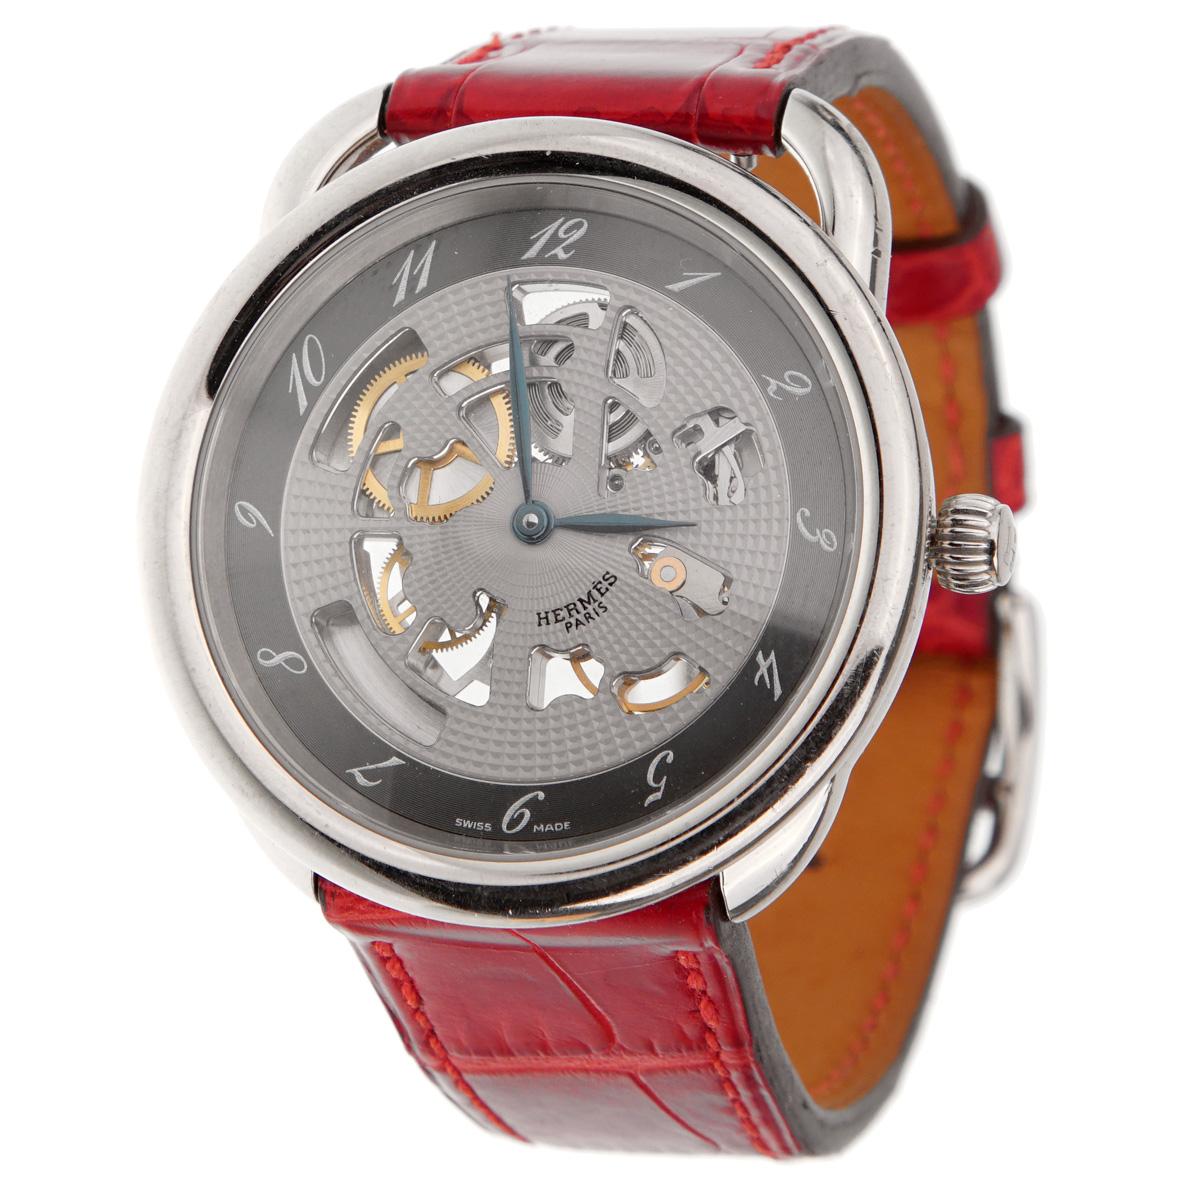 Hermes Anniversary Limited Edition Arceau White Gold Watch For Sale